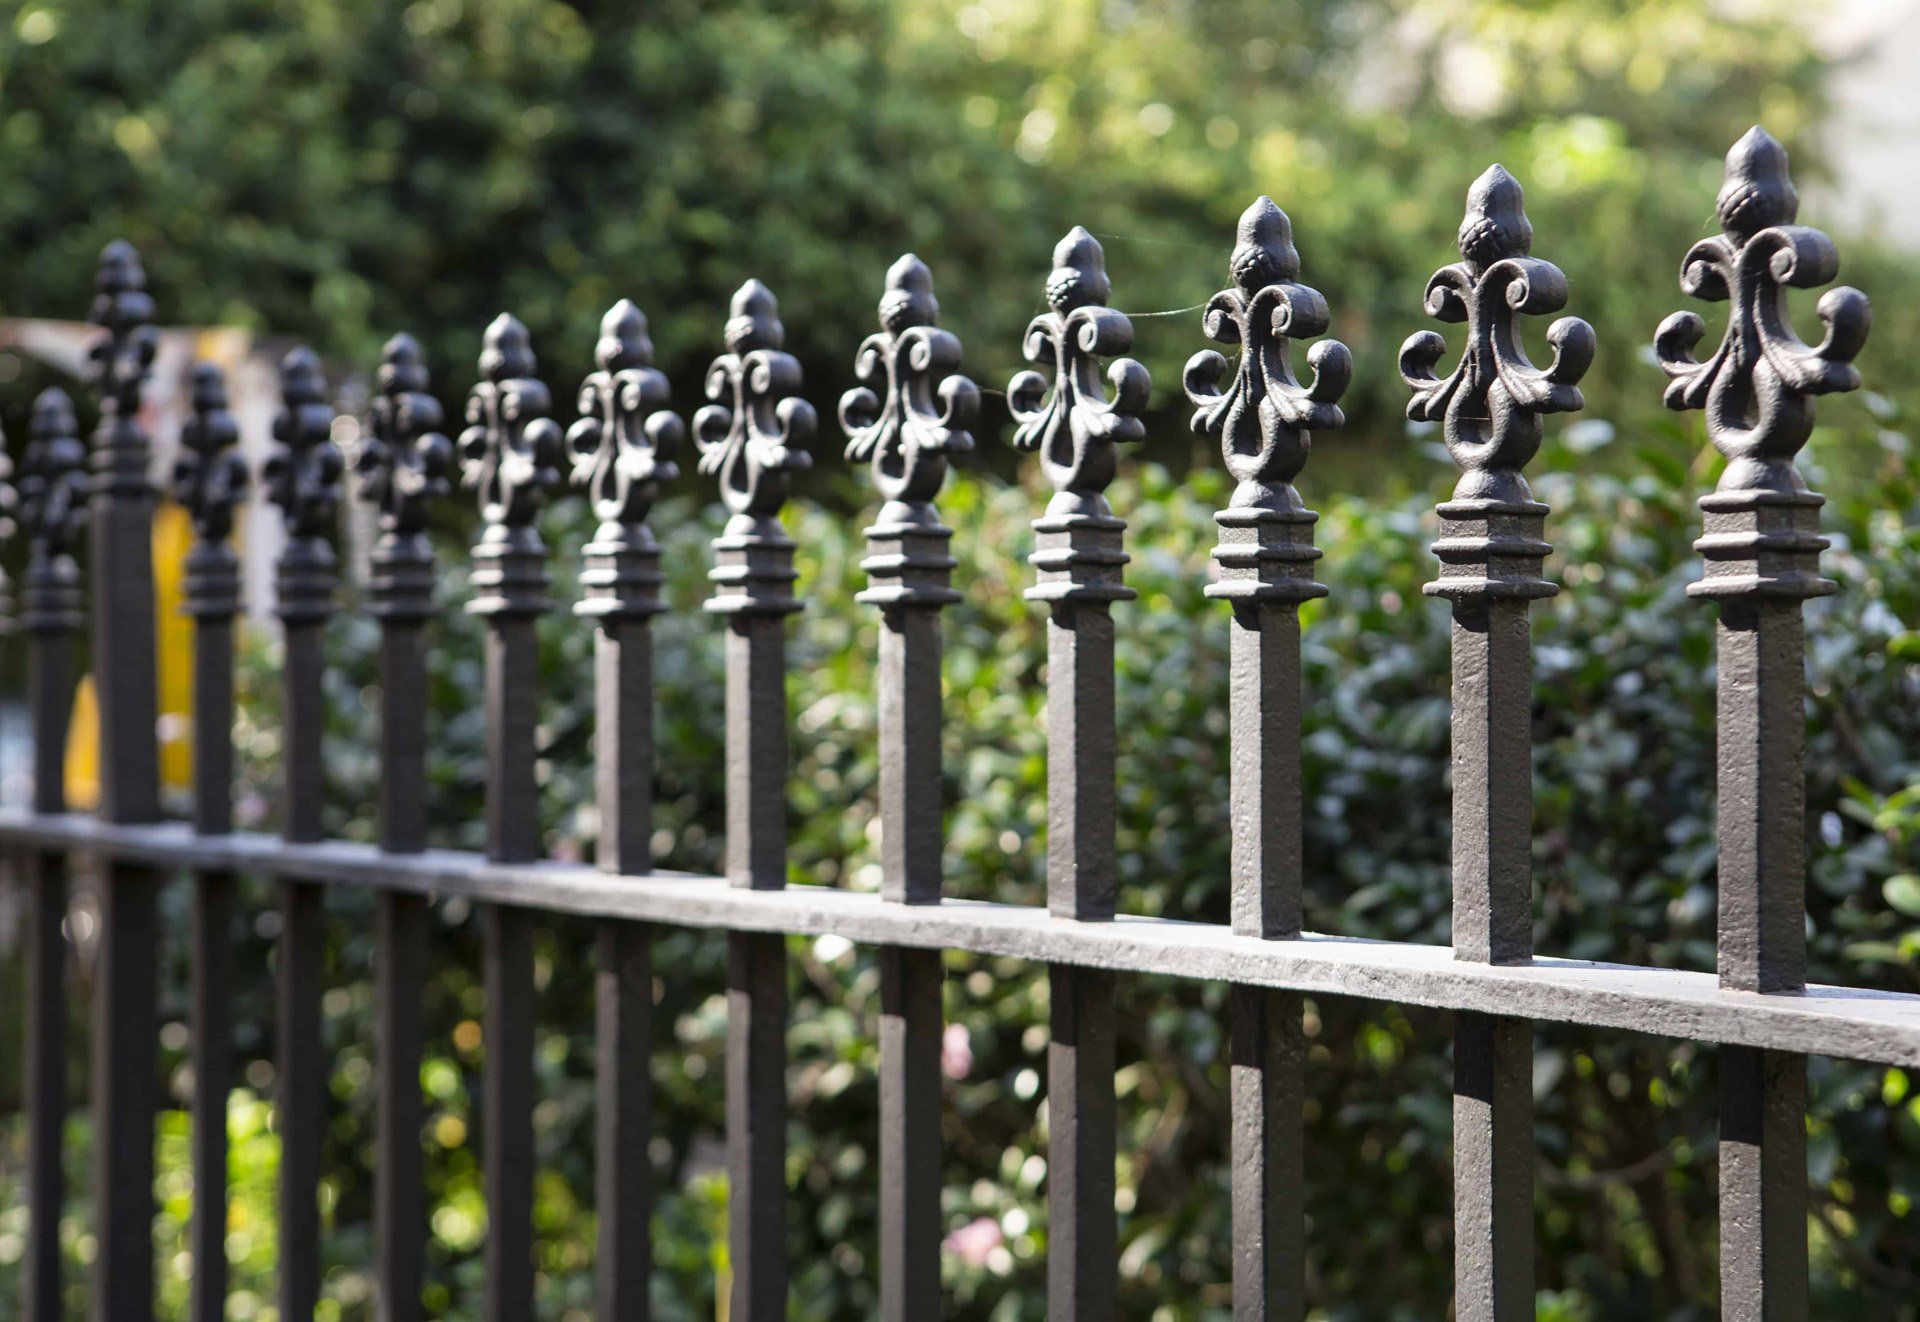 Wrought iron fence is a decorative fence material